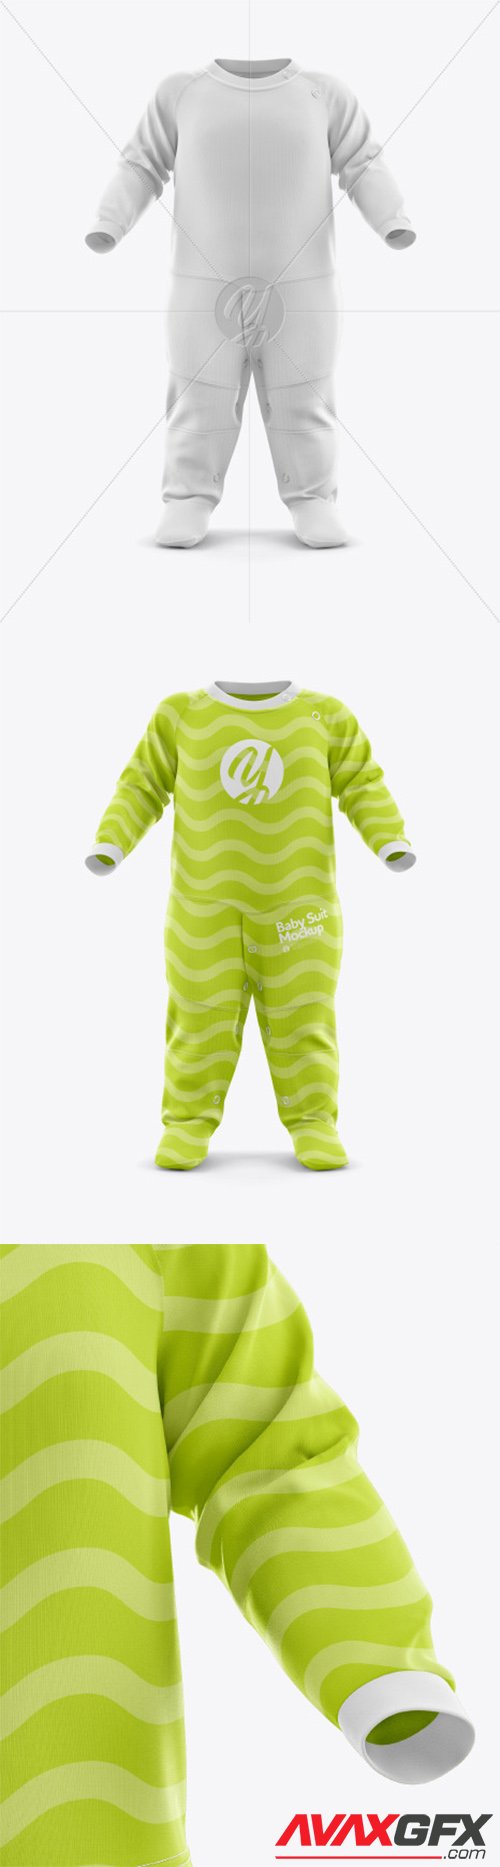 Baby Suit Mockup - Front View 44243